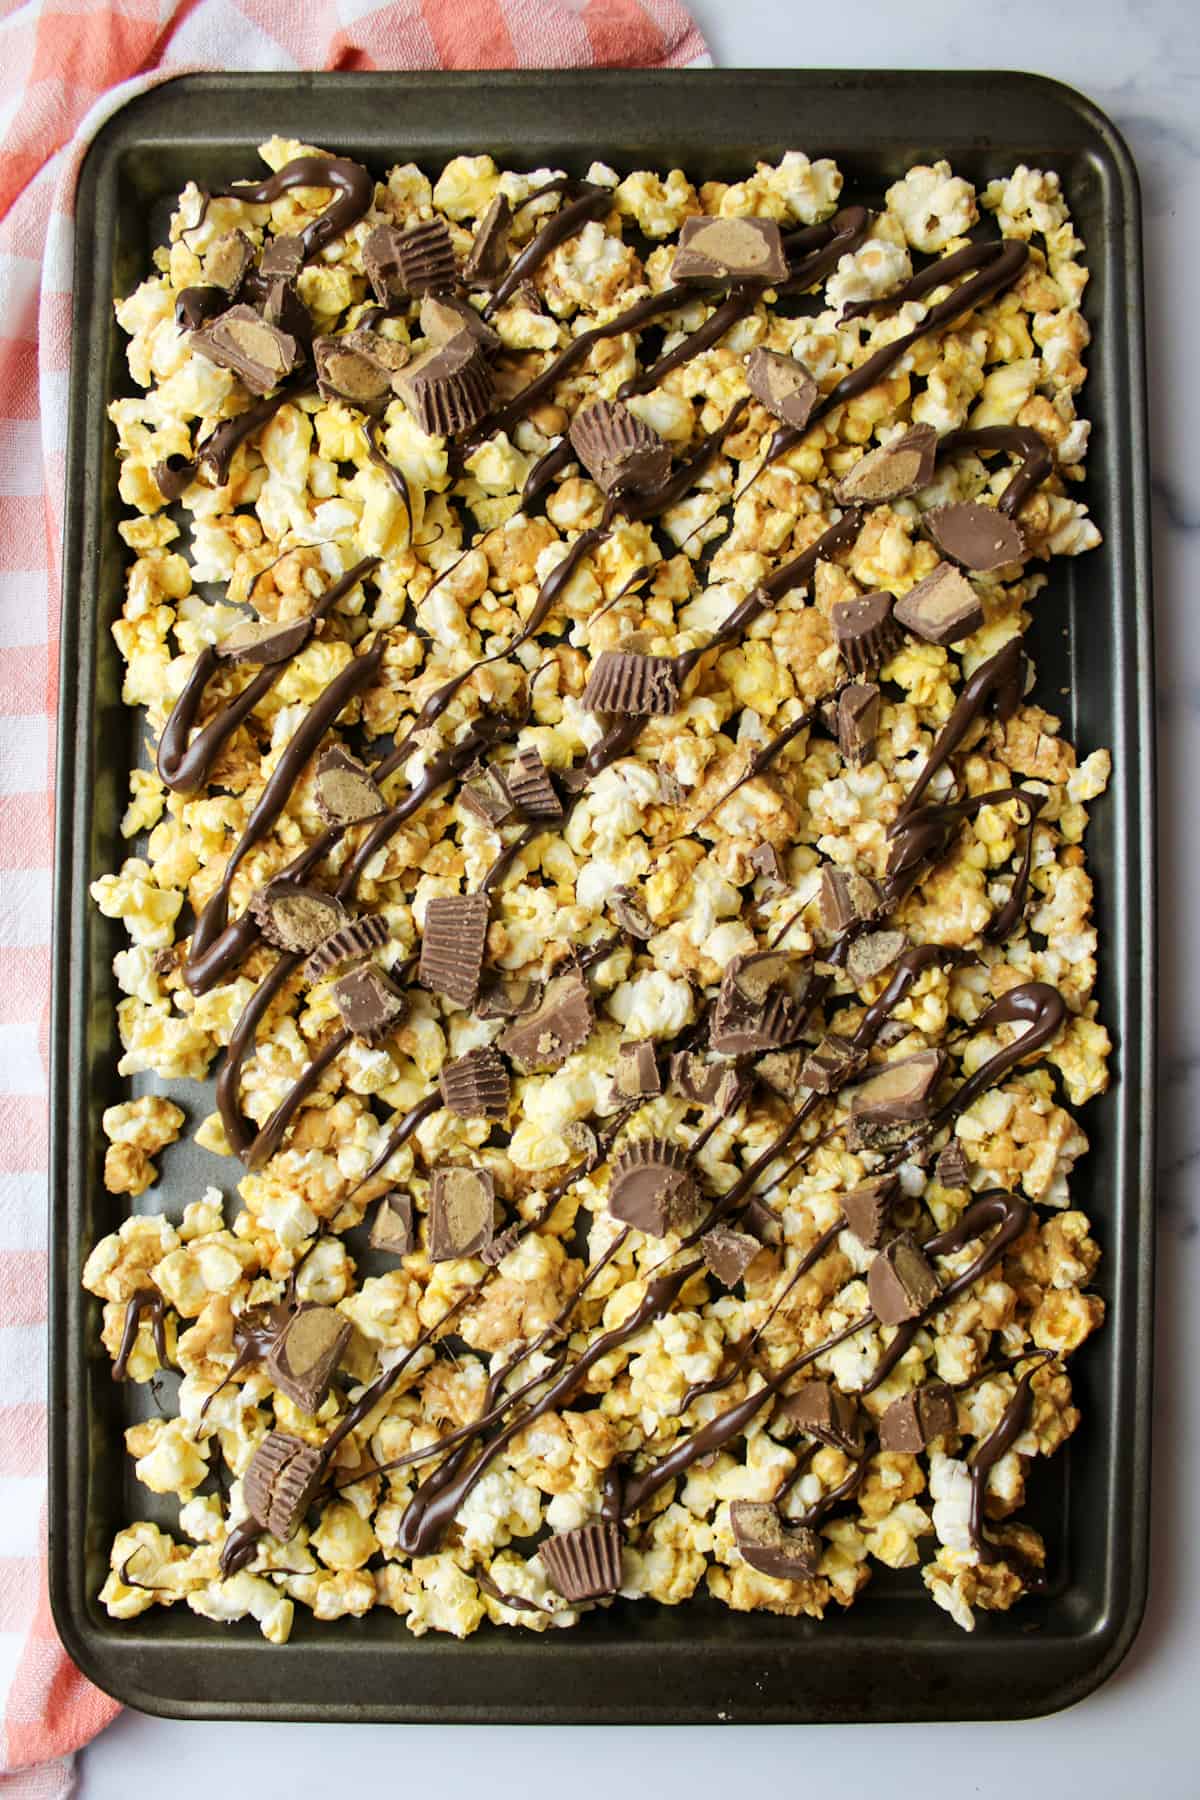 chocolate drizzled over peanut butter coated popcorn on a baking sheet and topped with chunks of peanut butter cups